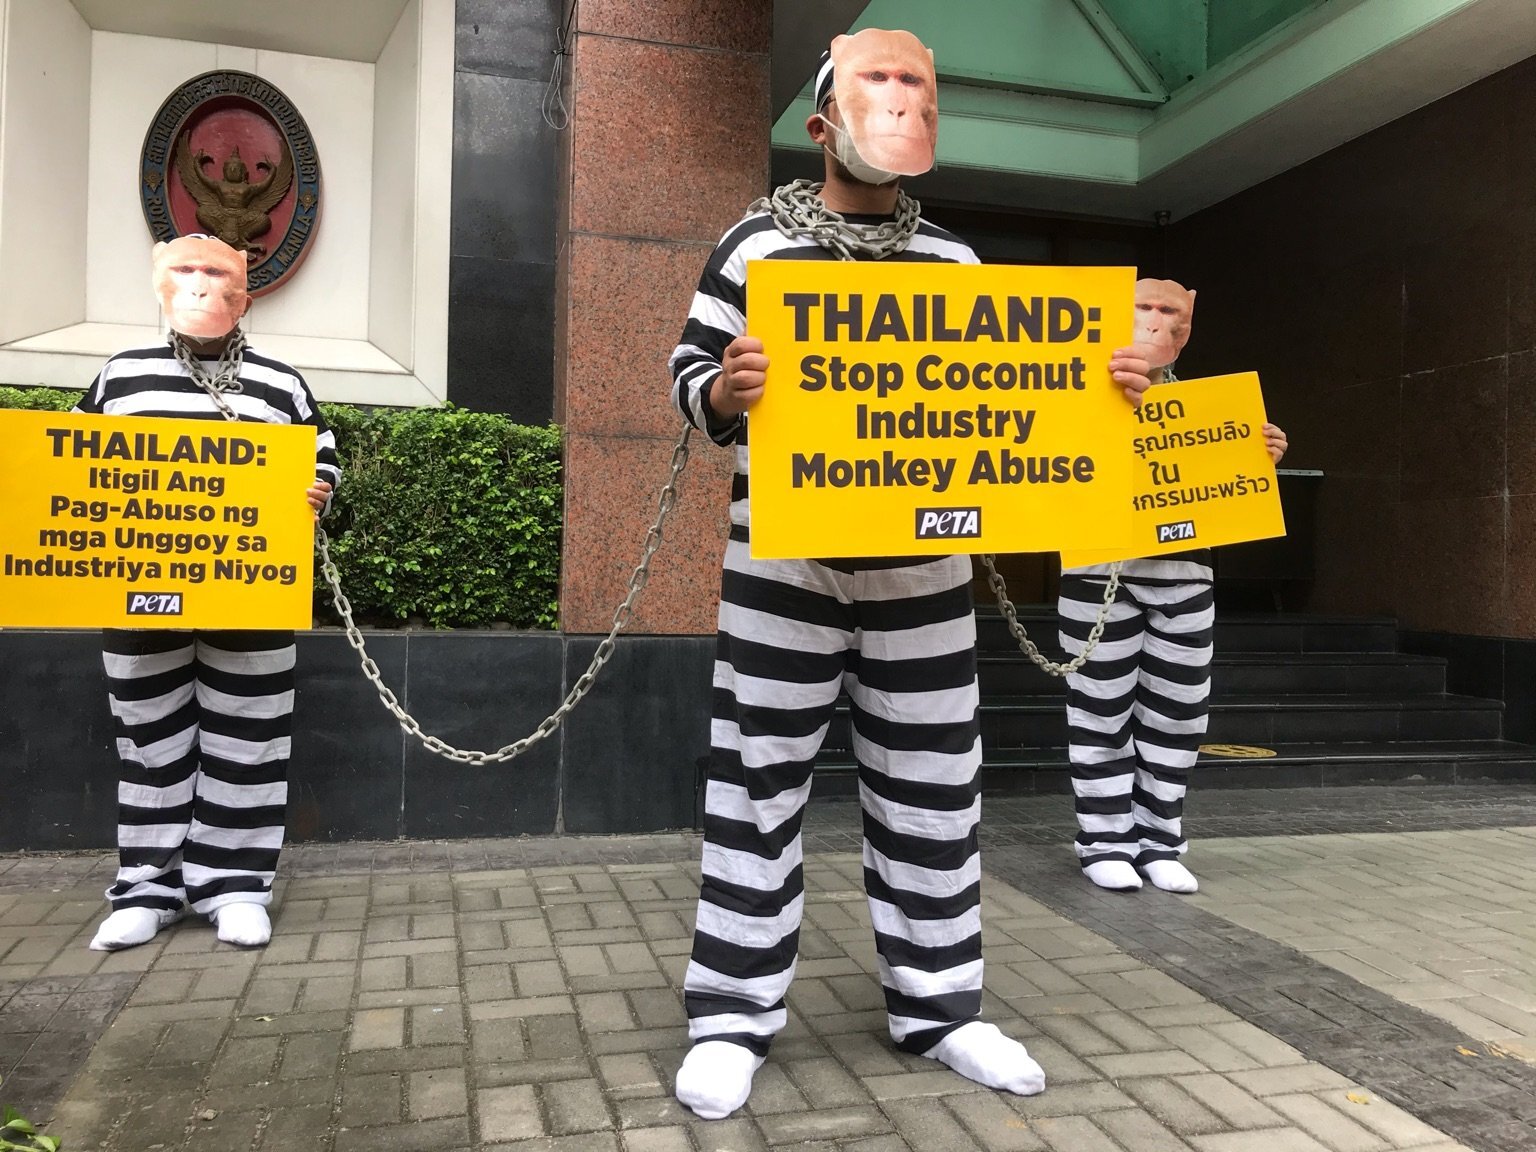 Photos: Chained ‘Monkeys’ Protest Thailand’s Cruel Use of Monkeys for Coconut Milk